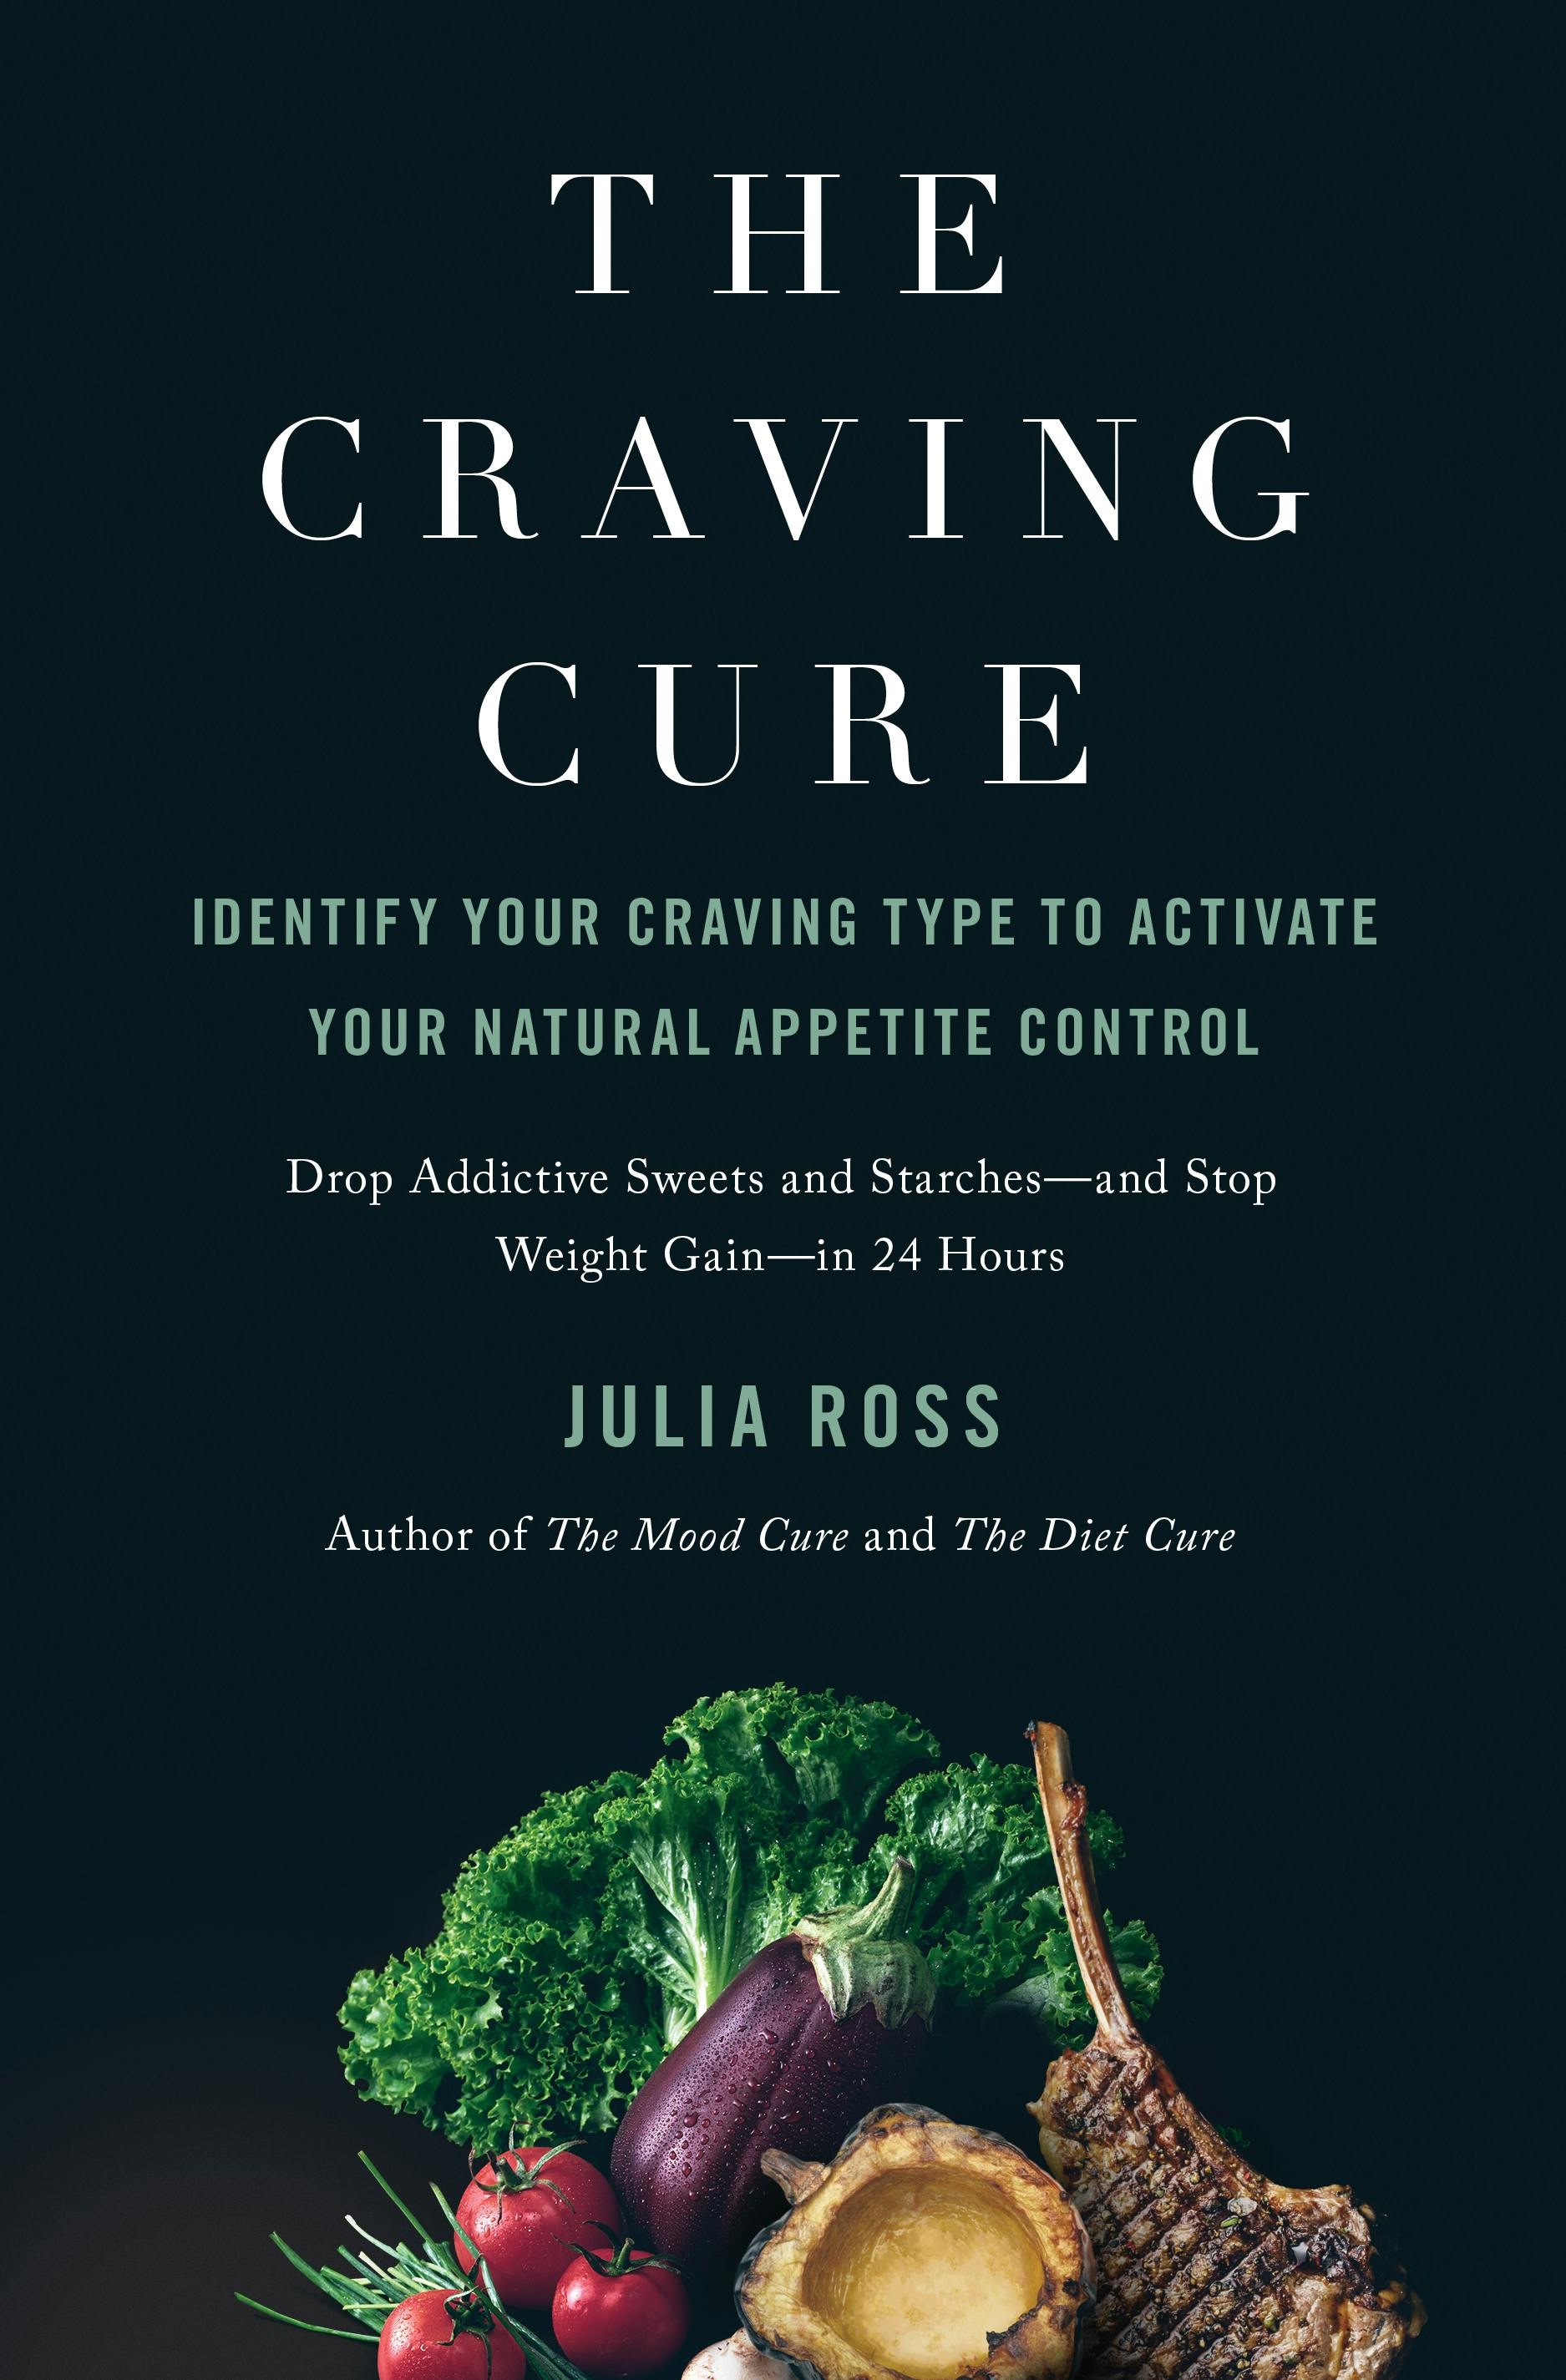 Curb Cravings: New Book Reveals What Those Impossible-to